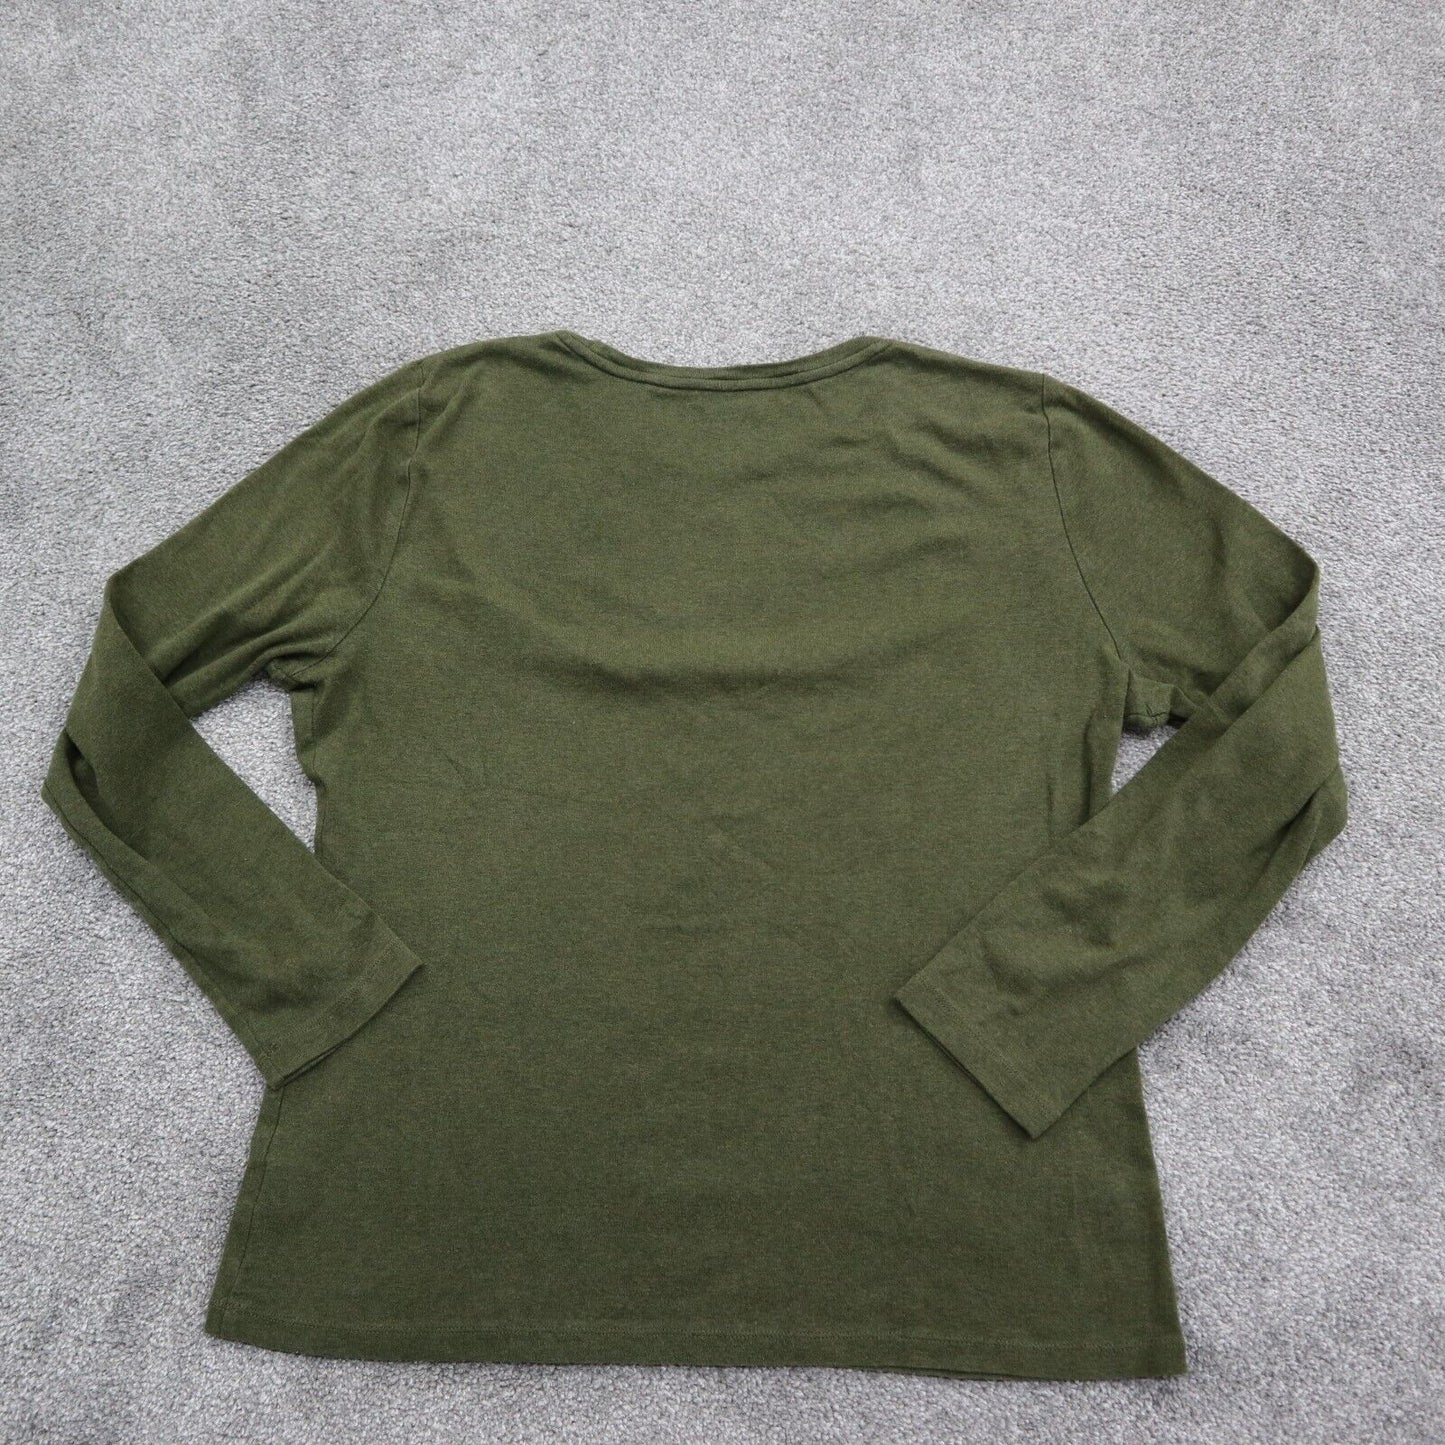 Talbots Womens Pullover Sweatshirt Top 100% Cotton Long Sleeve Olive Green Large